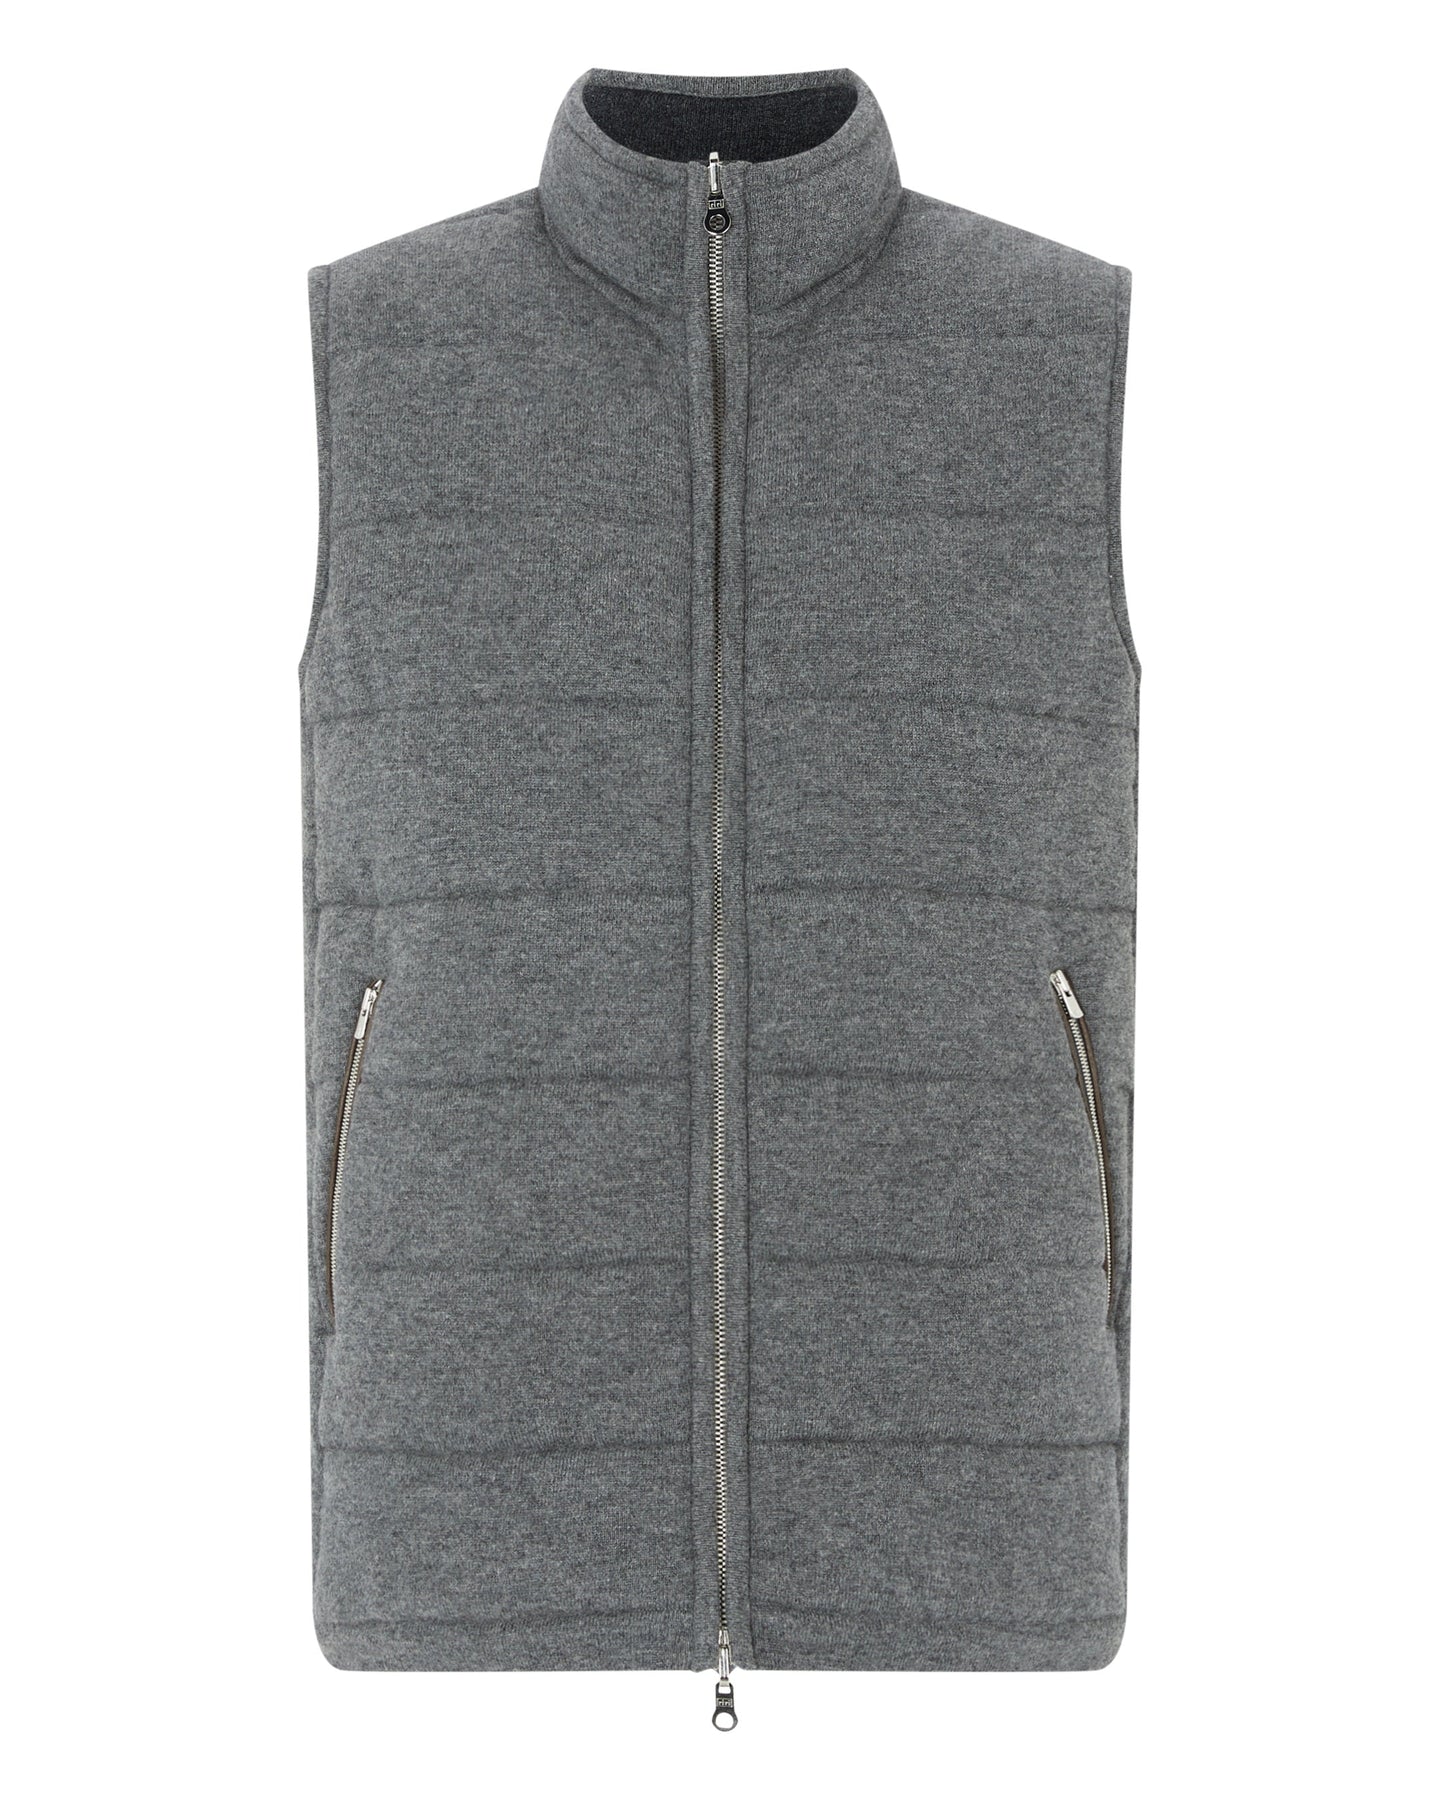 N.Peal Men's The Mall Quilted Cashmere Gilet Elephant Grey + Dark Charcoal Grey